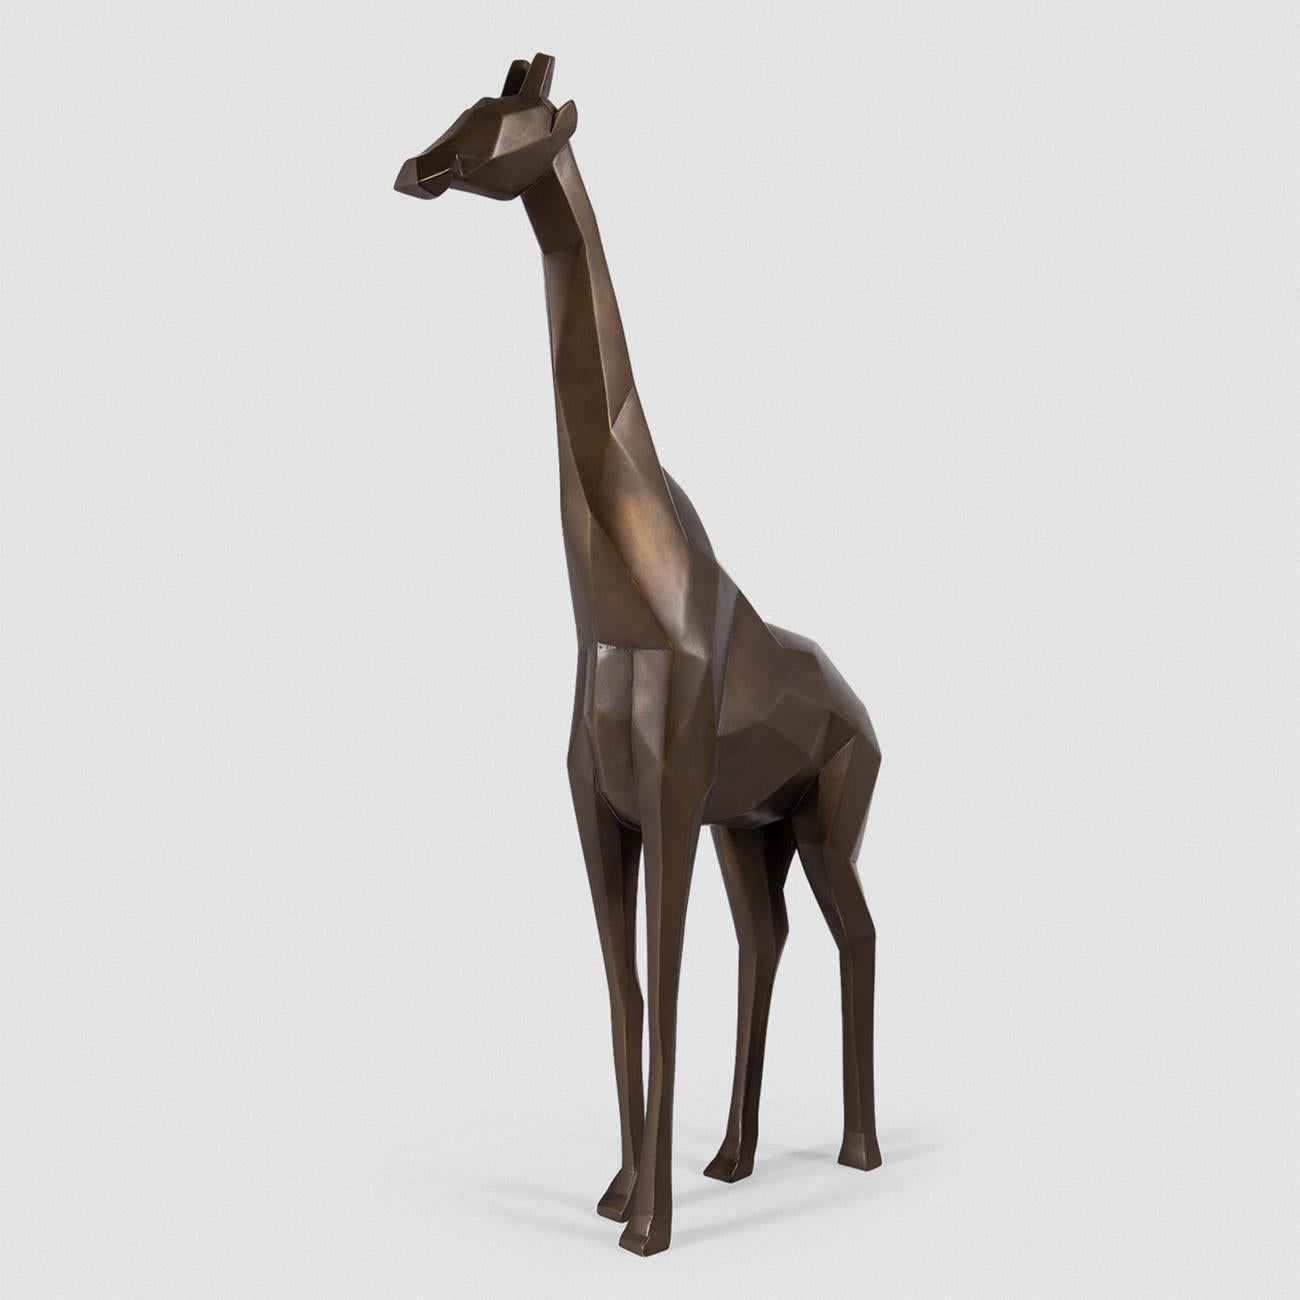 Sculpture Girafle in resin, 
in patinated bronzage finish.
Cubic style sculpture.
Exceptional piece.